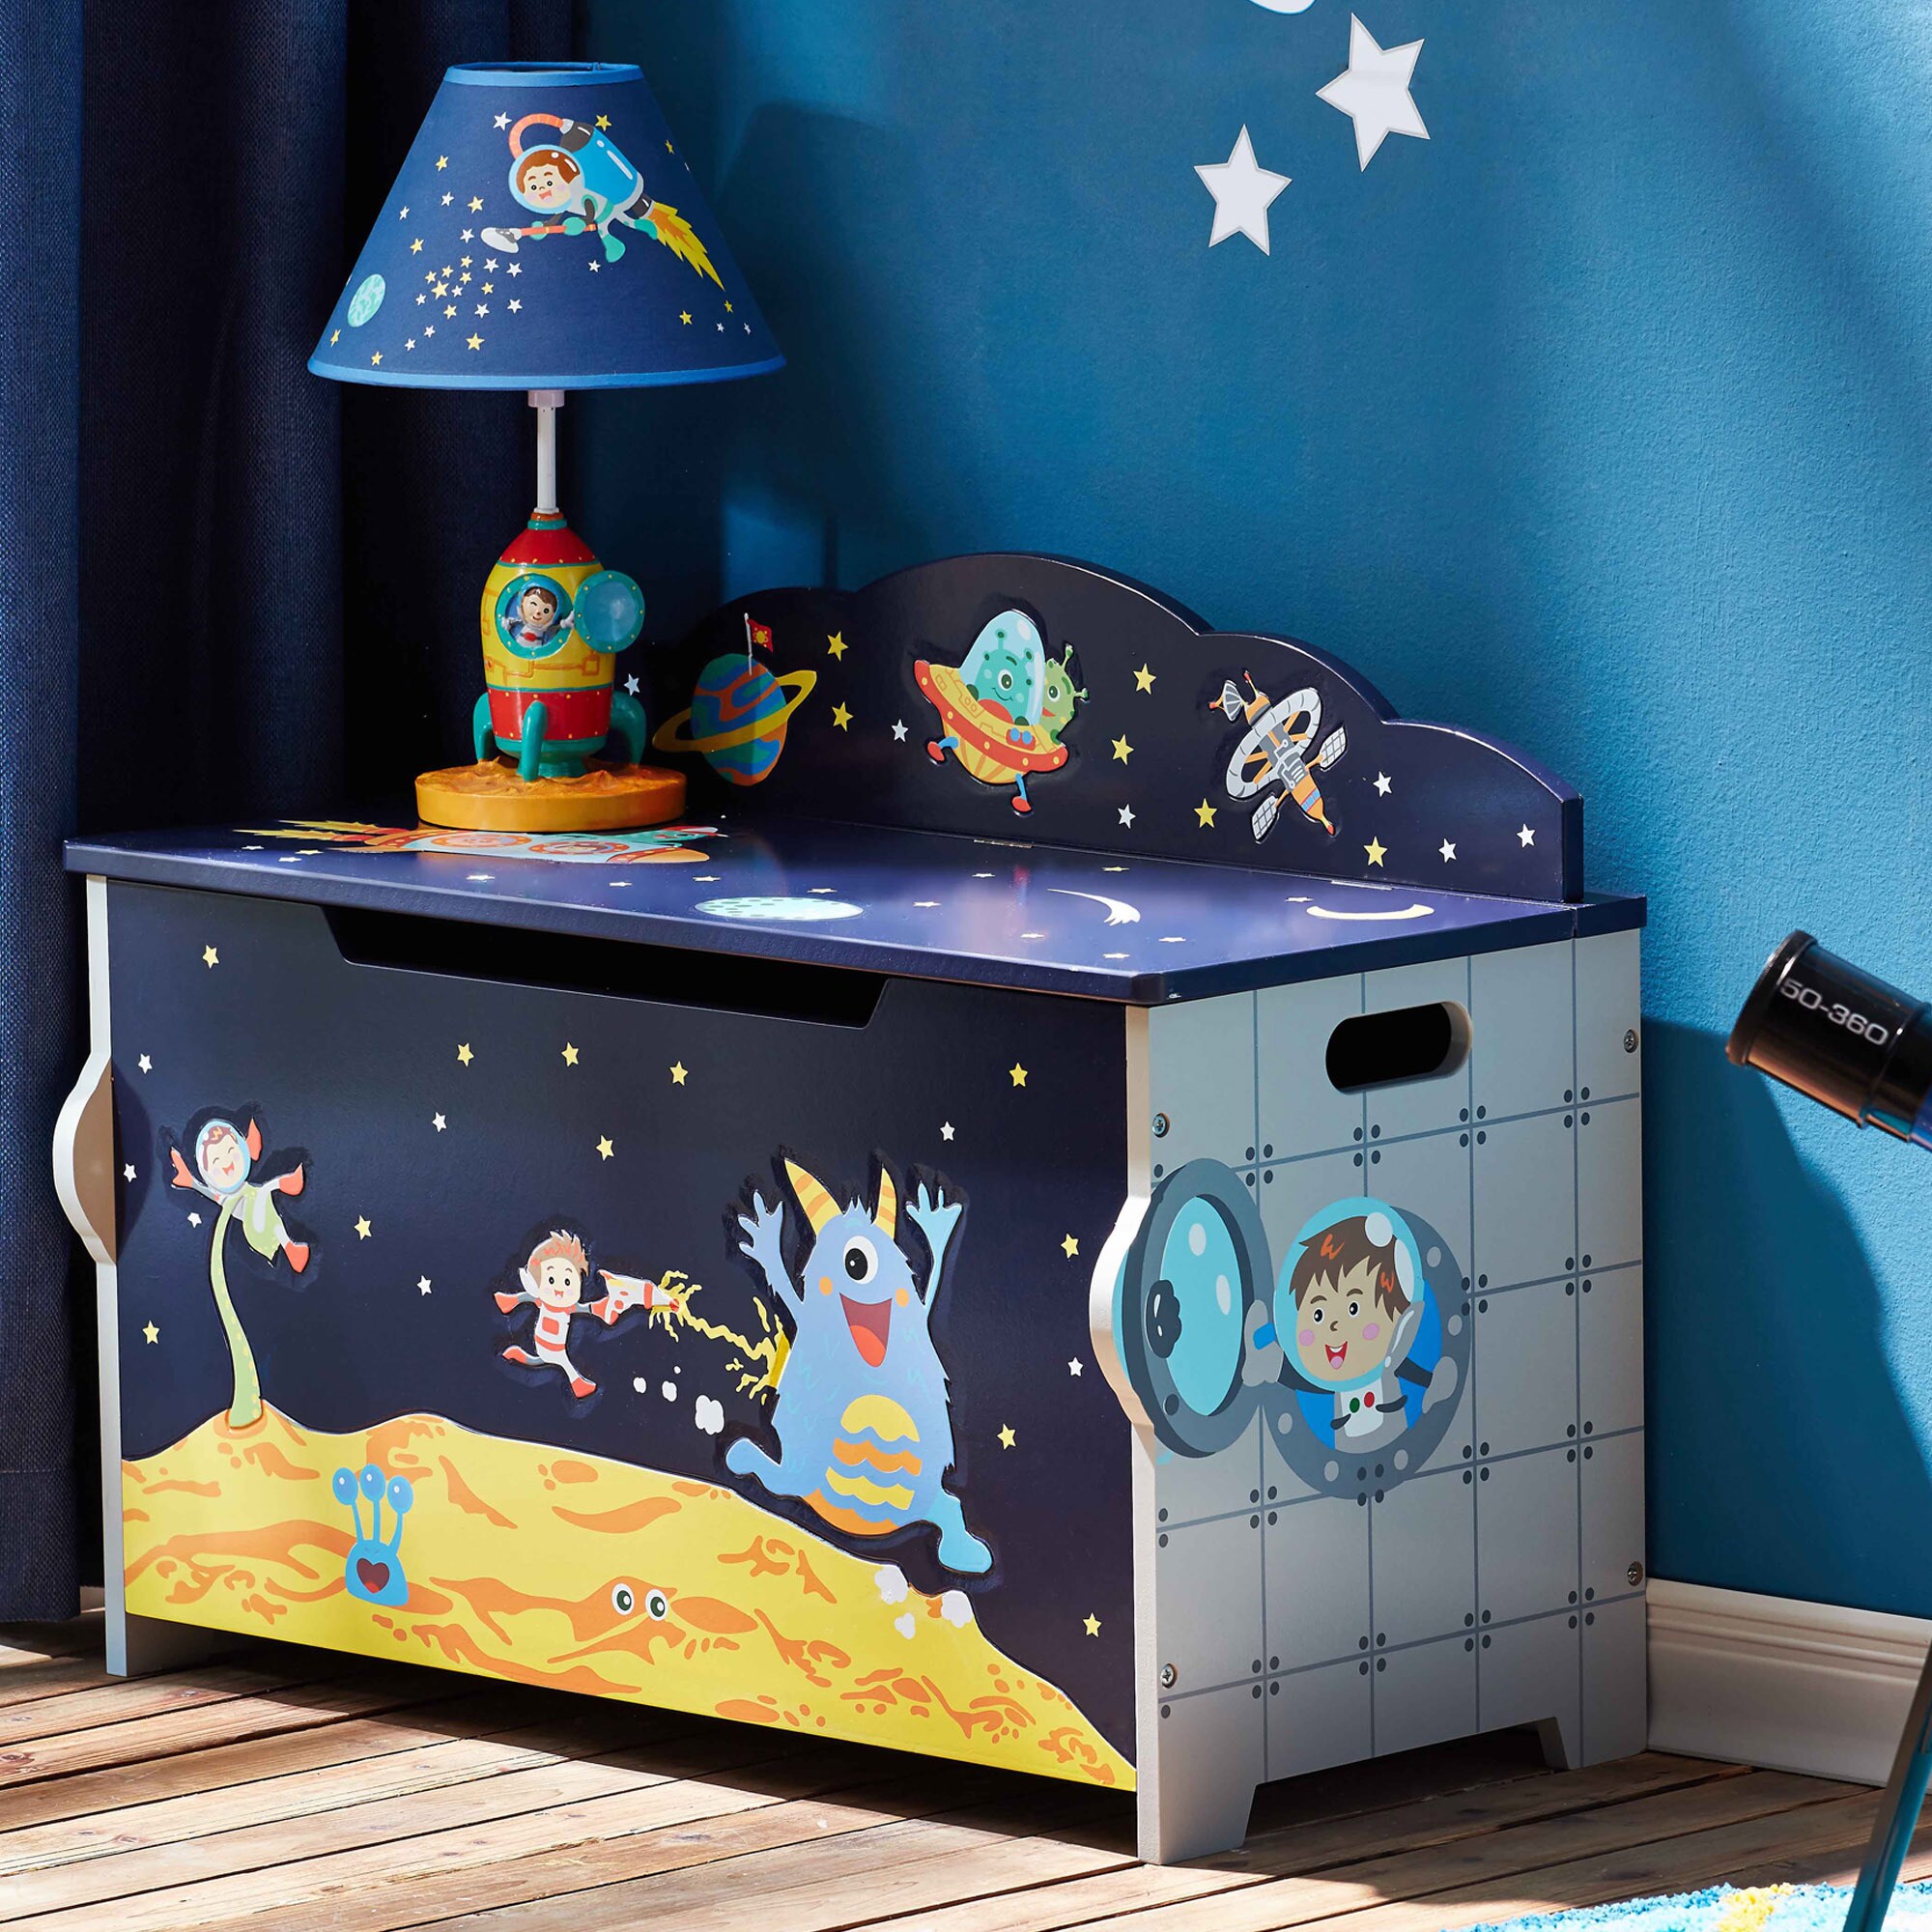 space themed toy box